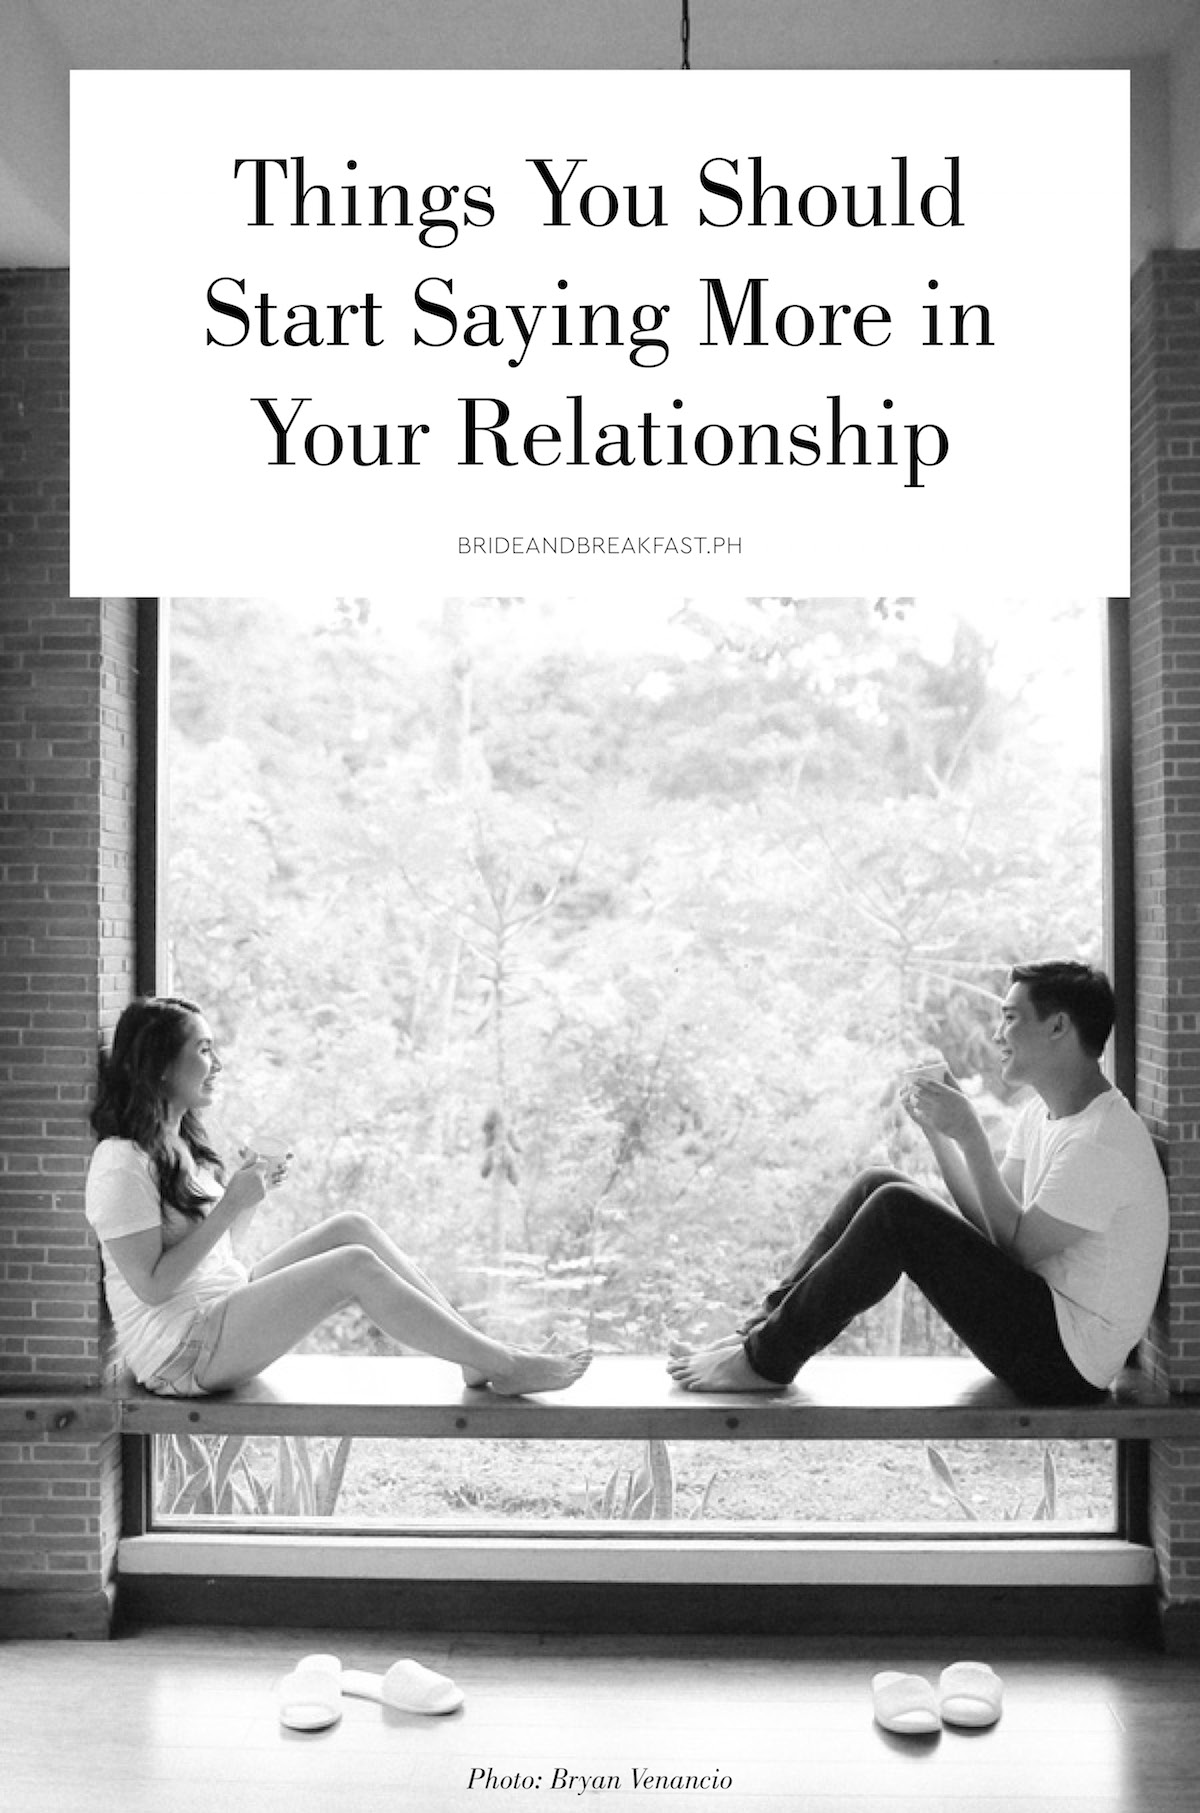 Things You Should Start Saying More in Your Relationship Photo: Bryan Venancio